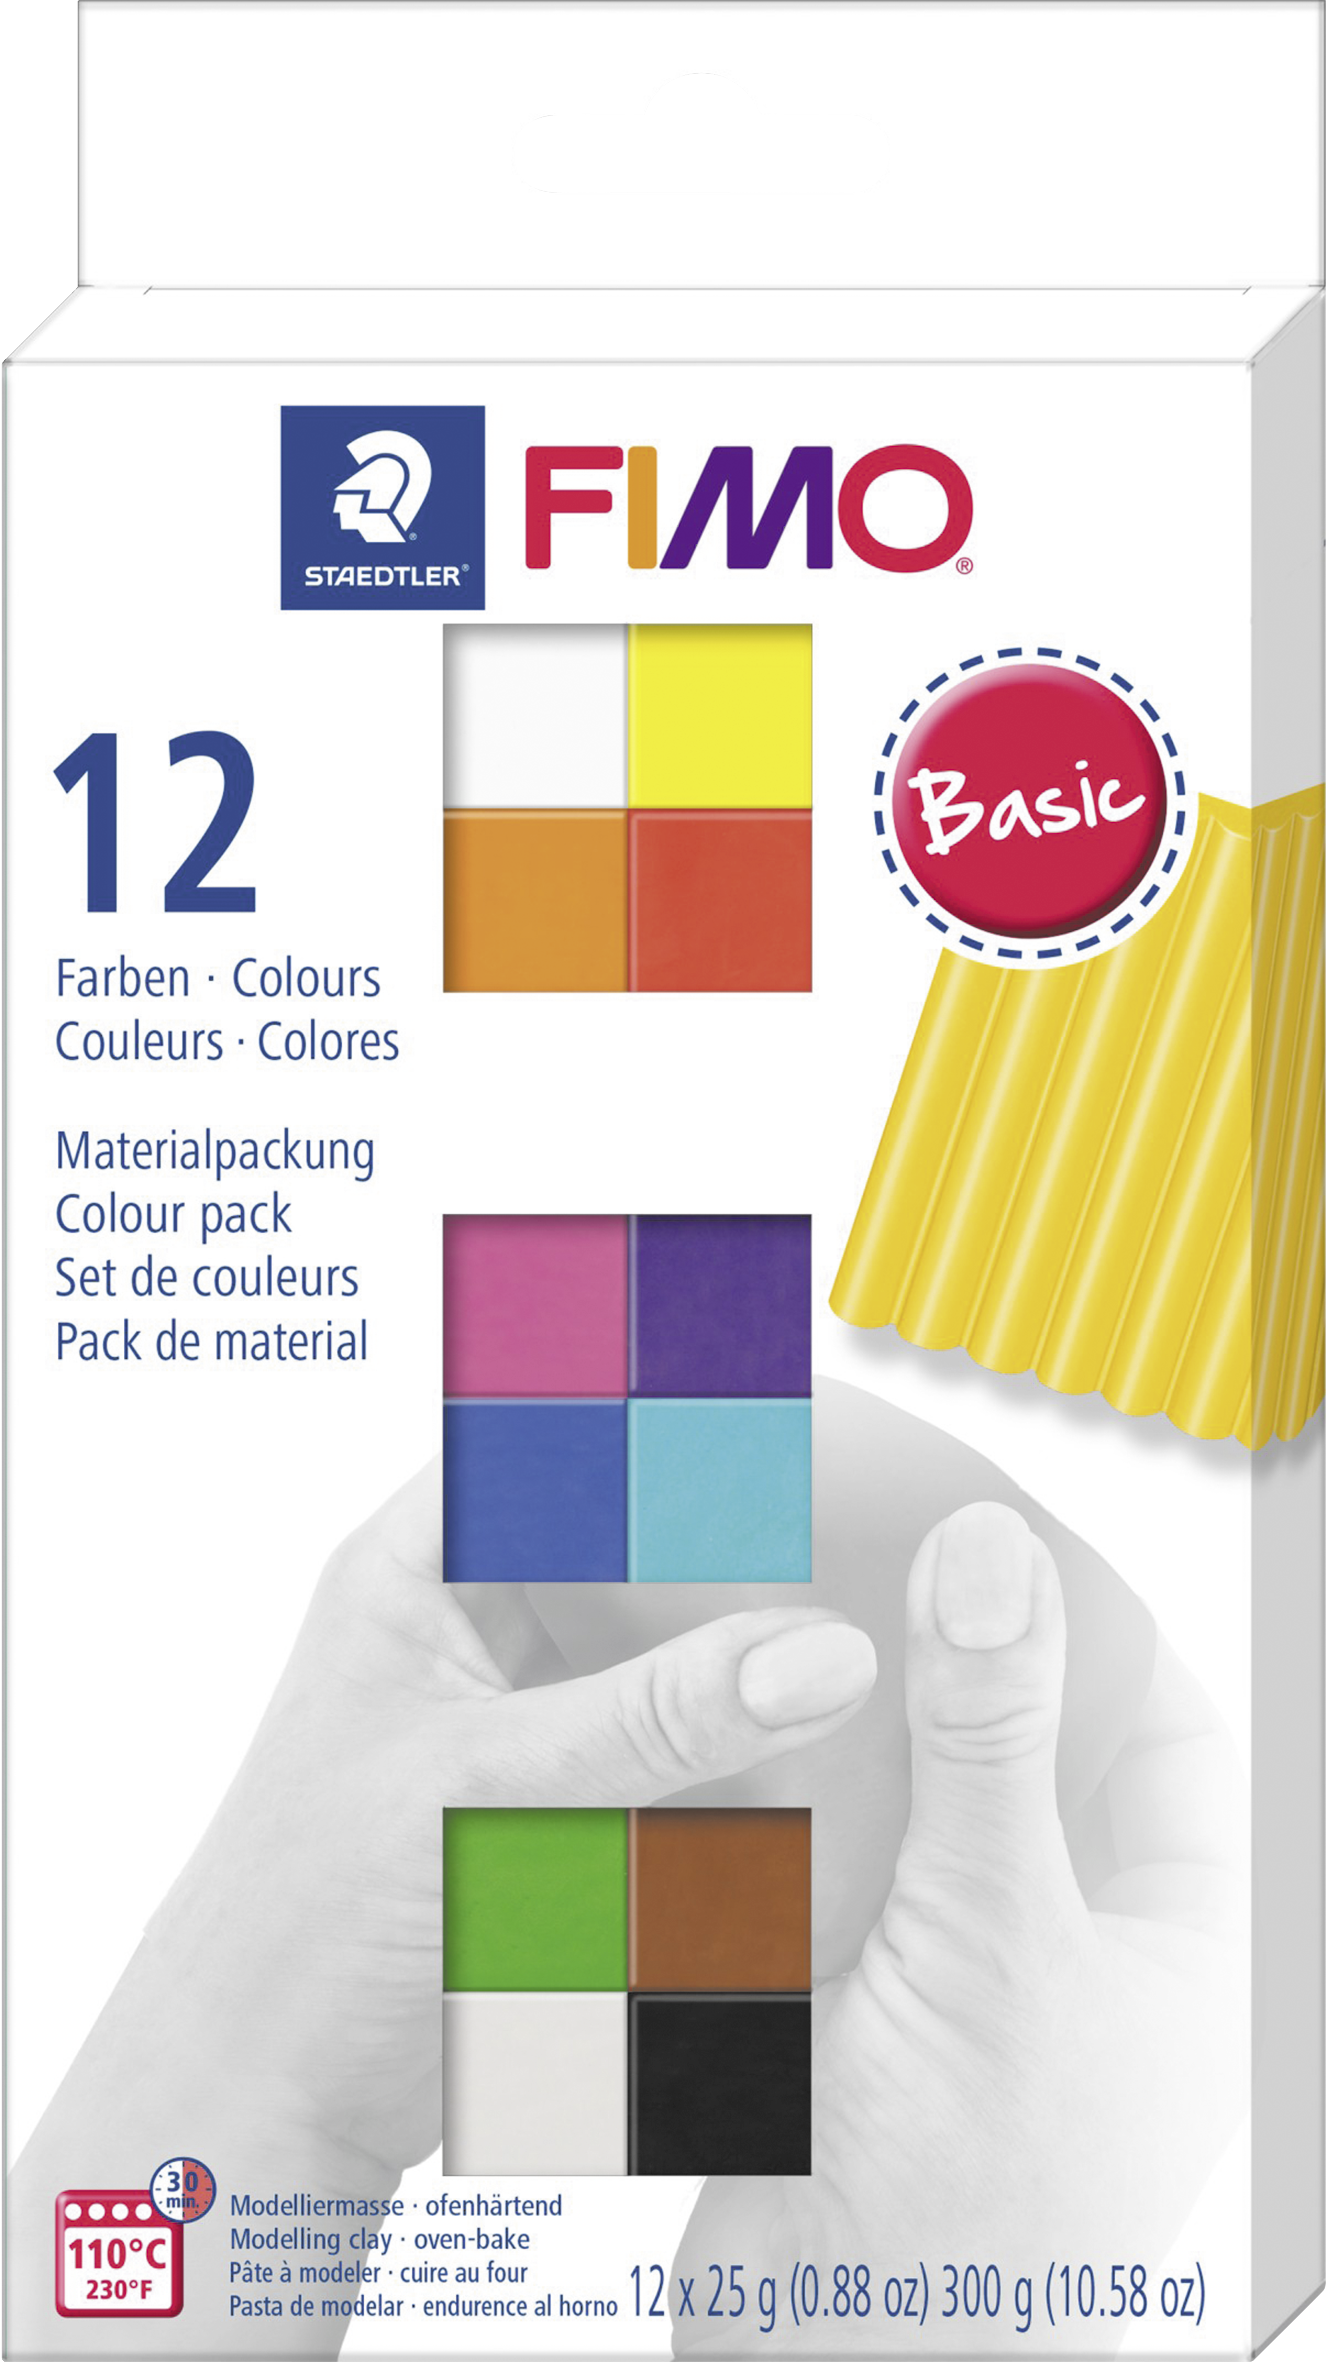 MODELLIERMASSE FIMO SOFT "COLOUR PACK" SORTIERT